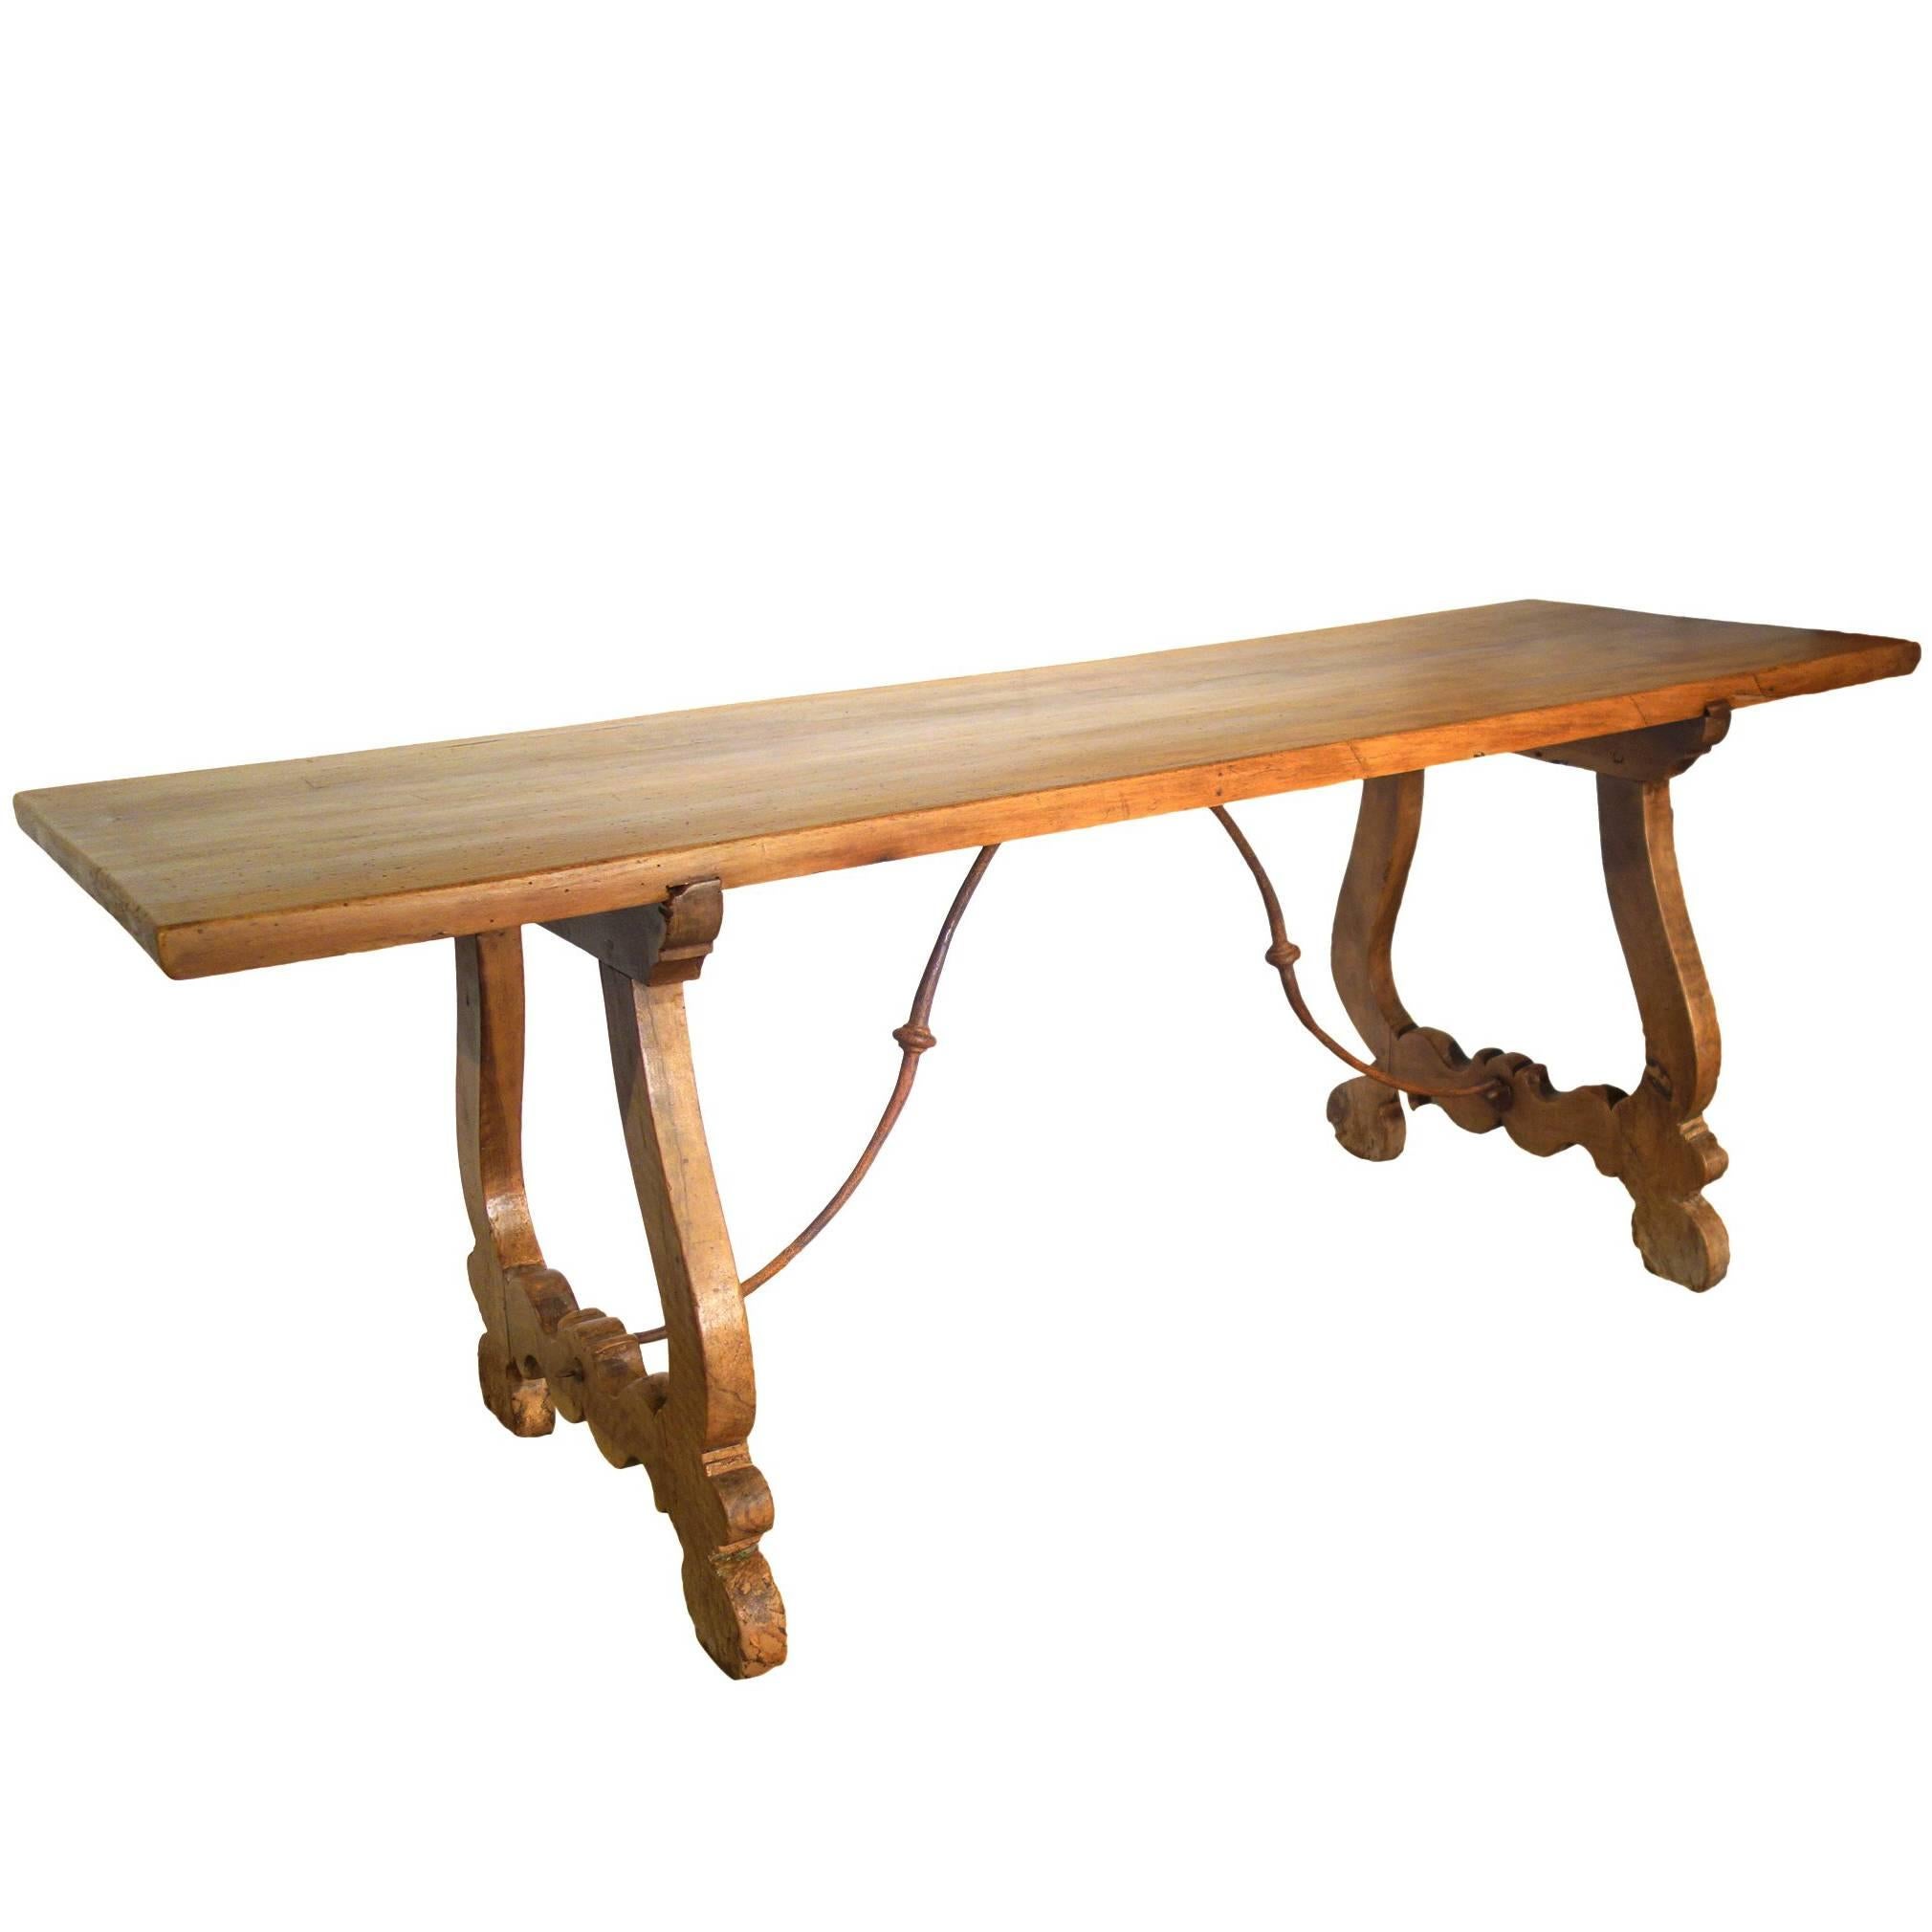 19th C Italian Walnut Farmhouse Table Style in reproduction sizes & finishes